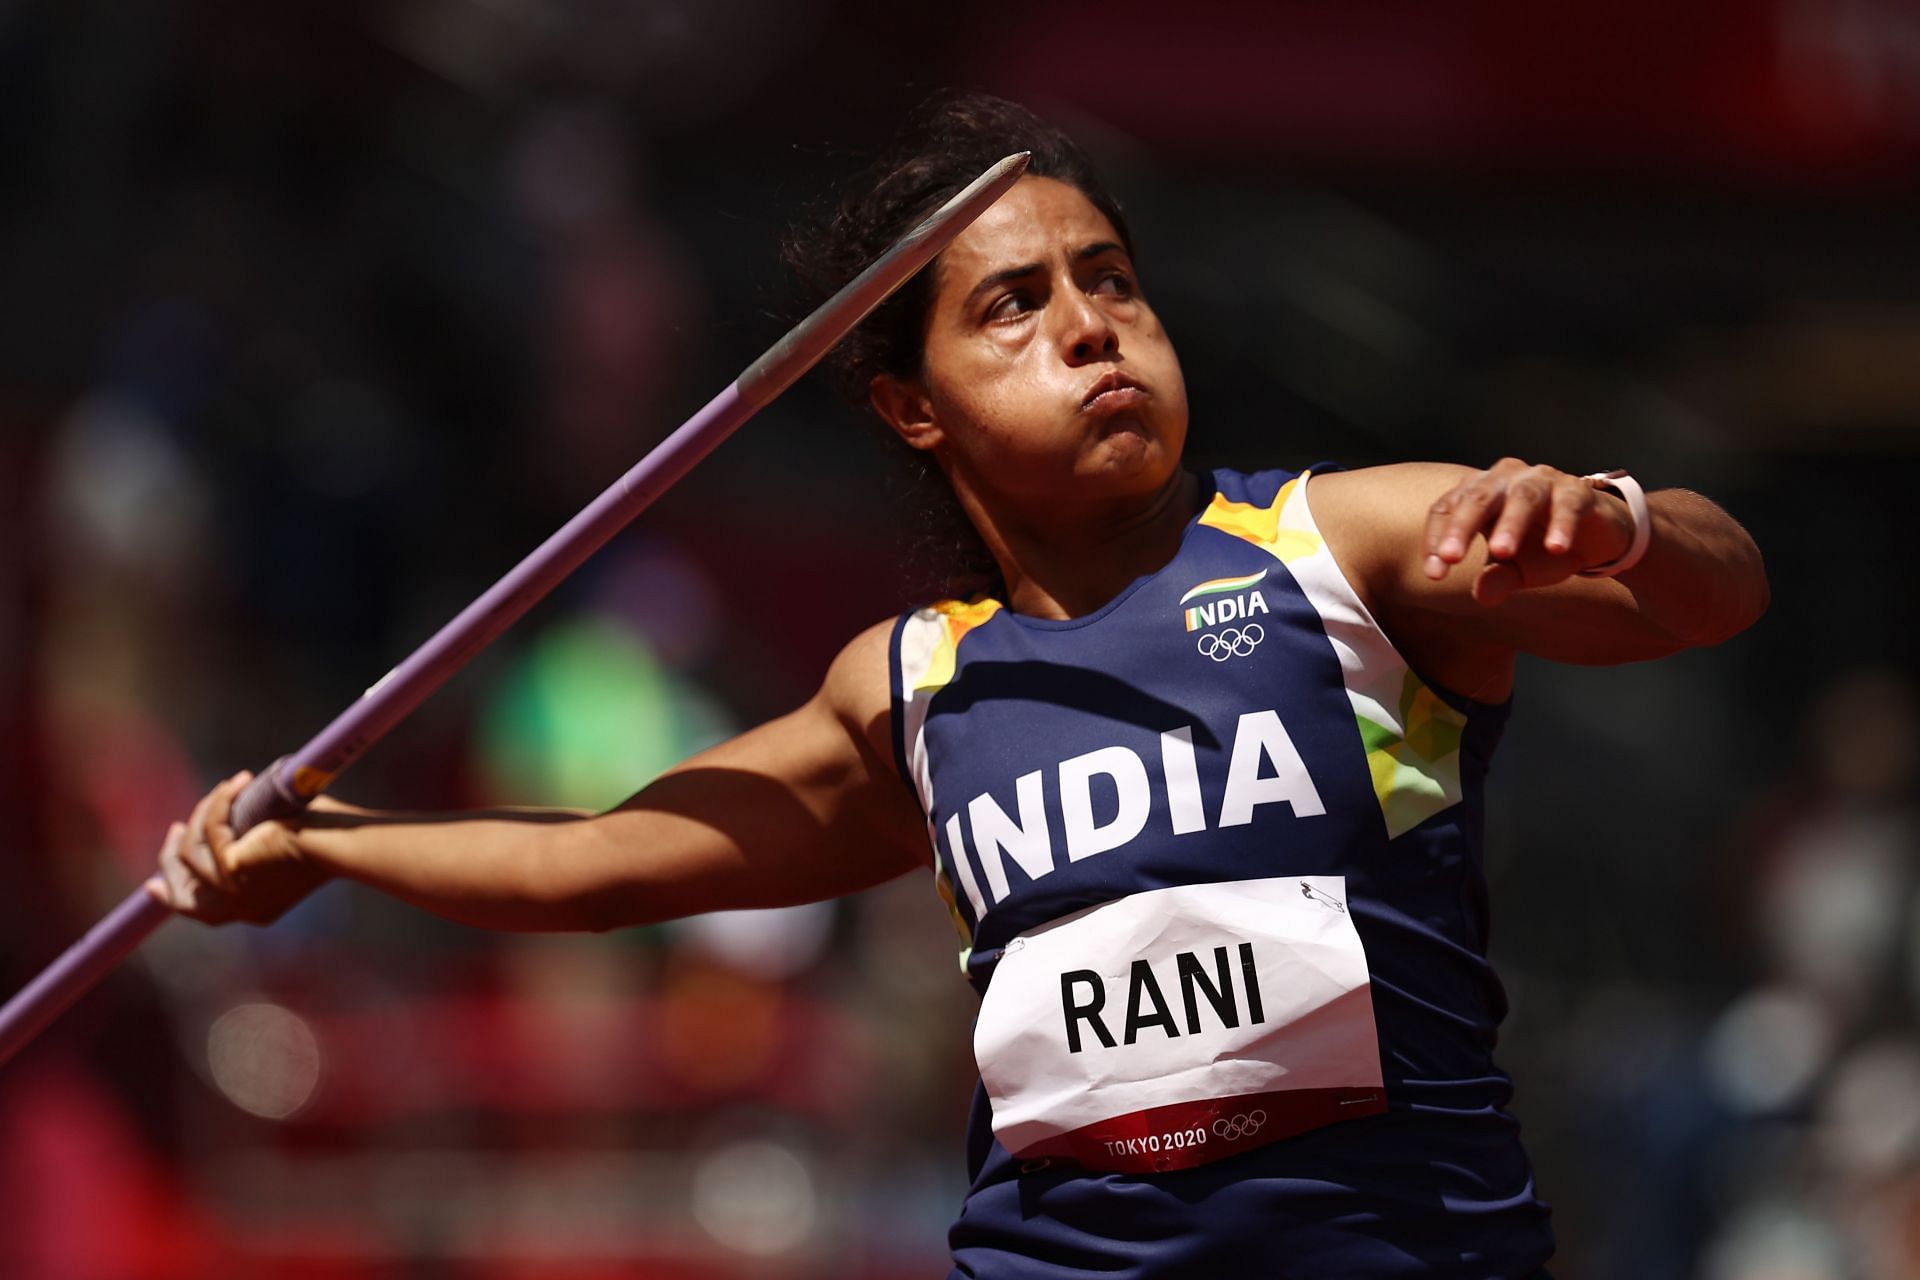 Indian javelin thrower Annu Rani. (PC: Getty Images)